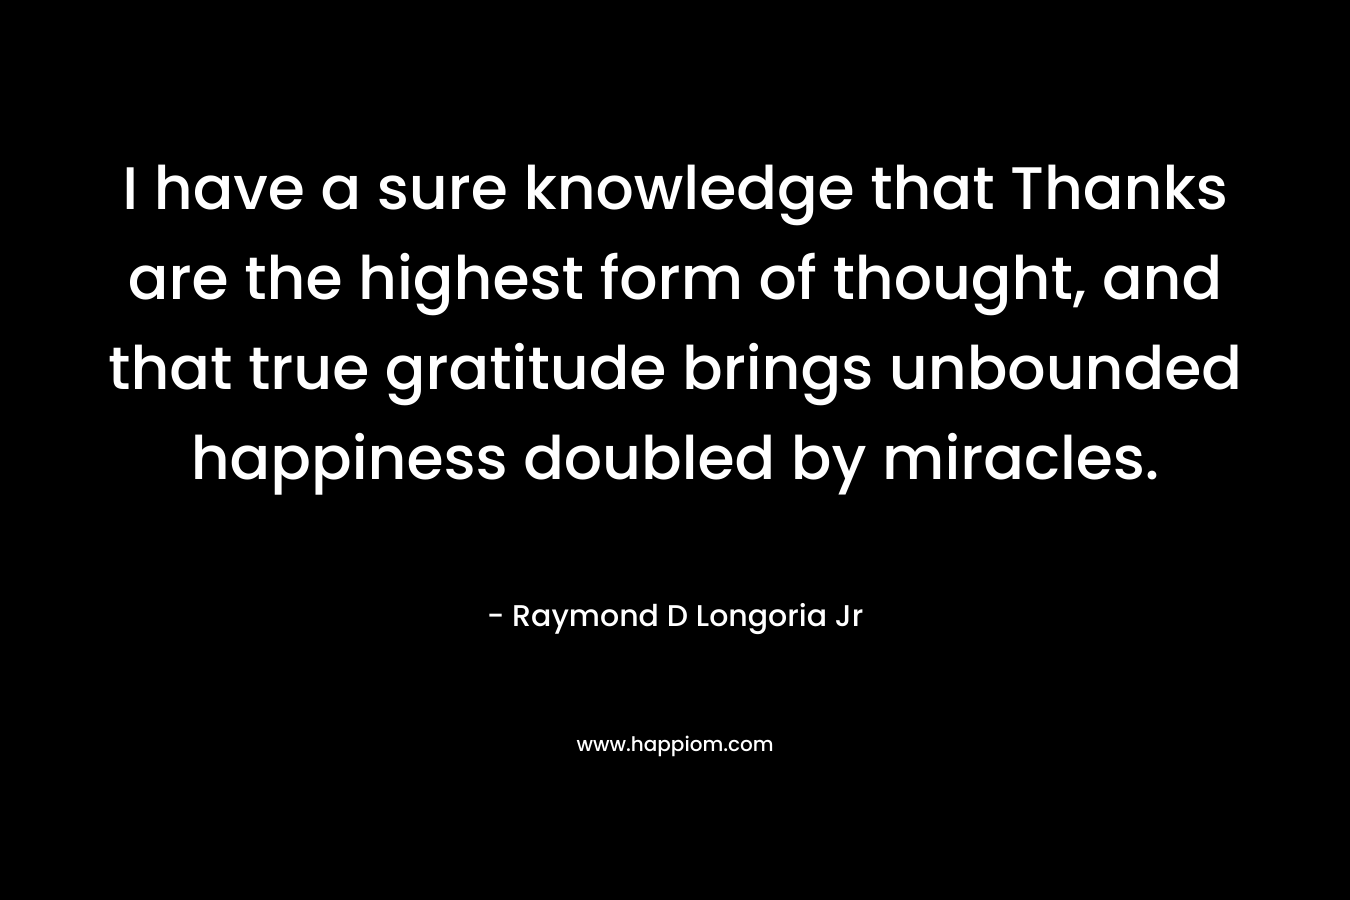 I have a sure knowledge that Thanks are the highest form of thought, and that true gratitude brings unbounded happiness doubled by miracles.